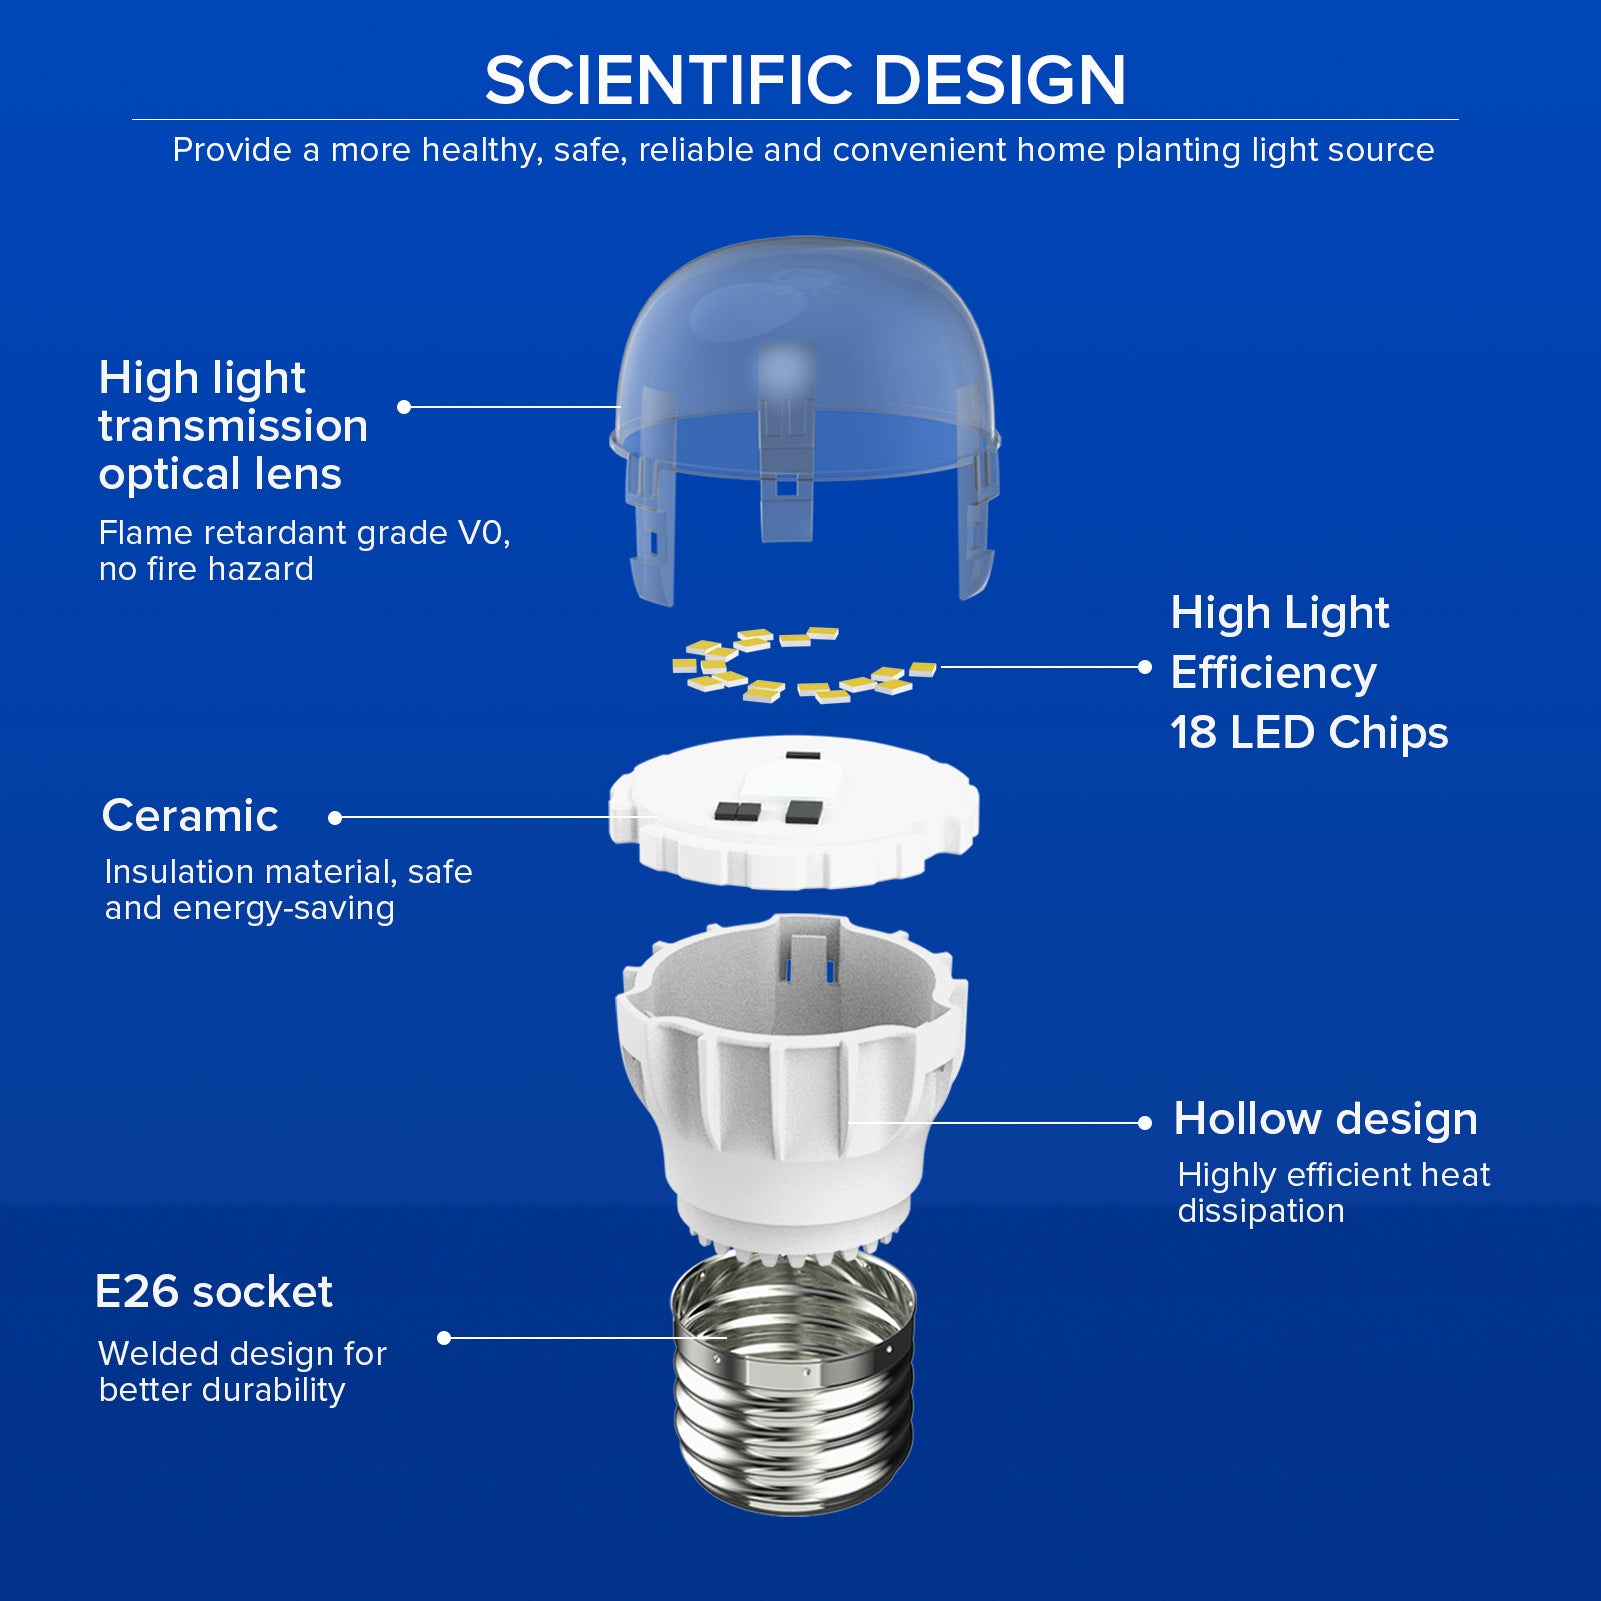 A11 7W LED Light Bulb with hollow design, ceramic patented technology, high quality IC chips and high light transmission optical lens